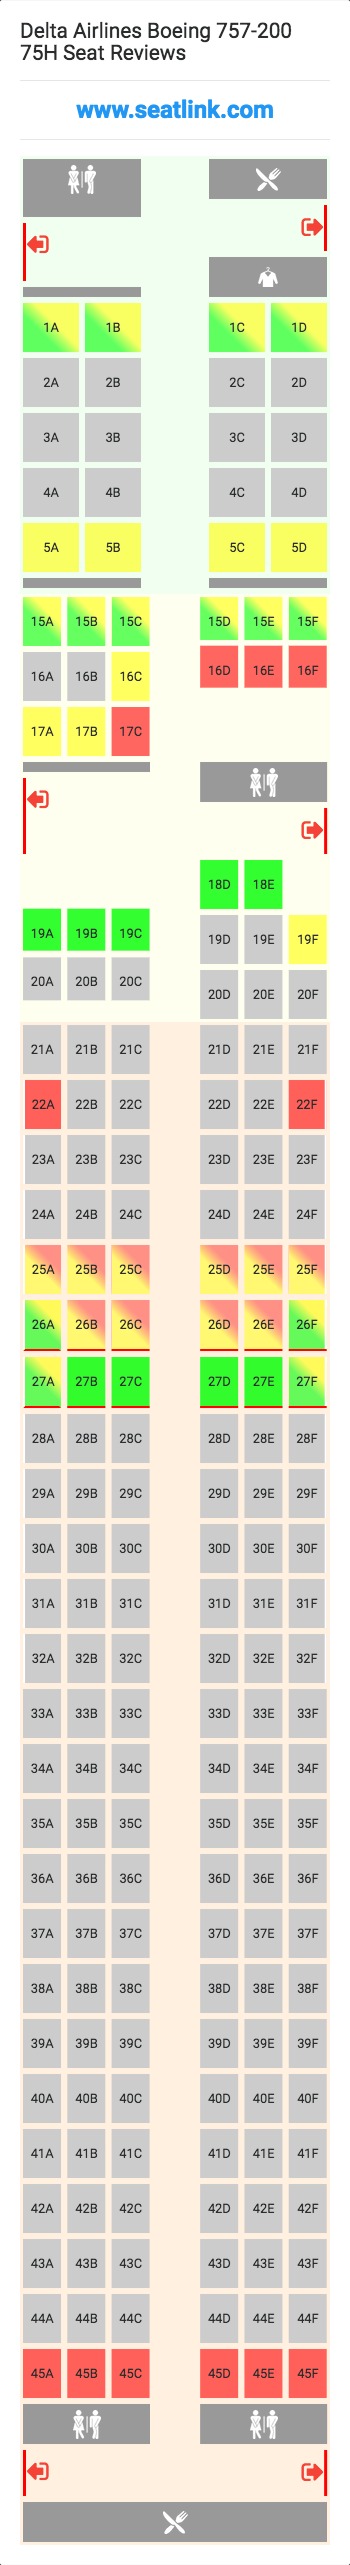 Delta Airlines 757 Seating Chart